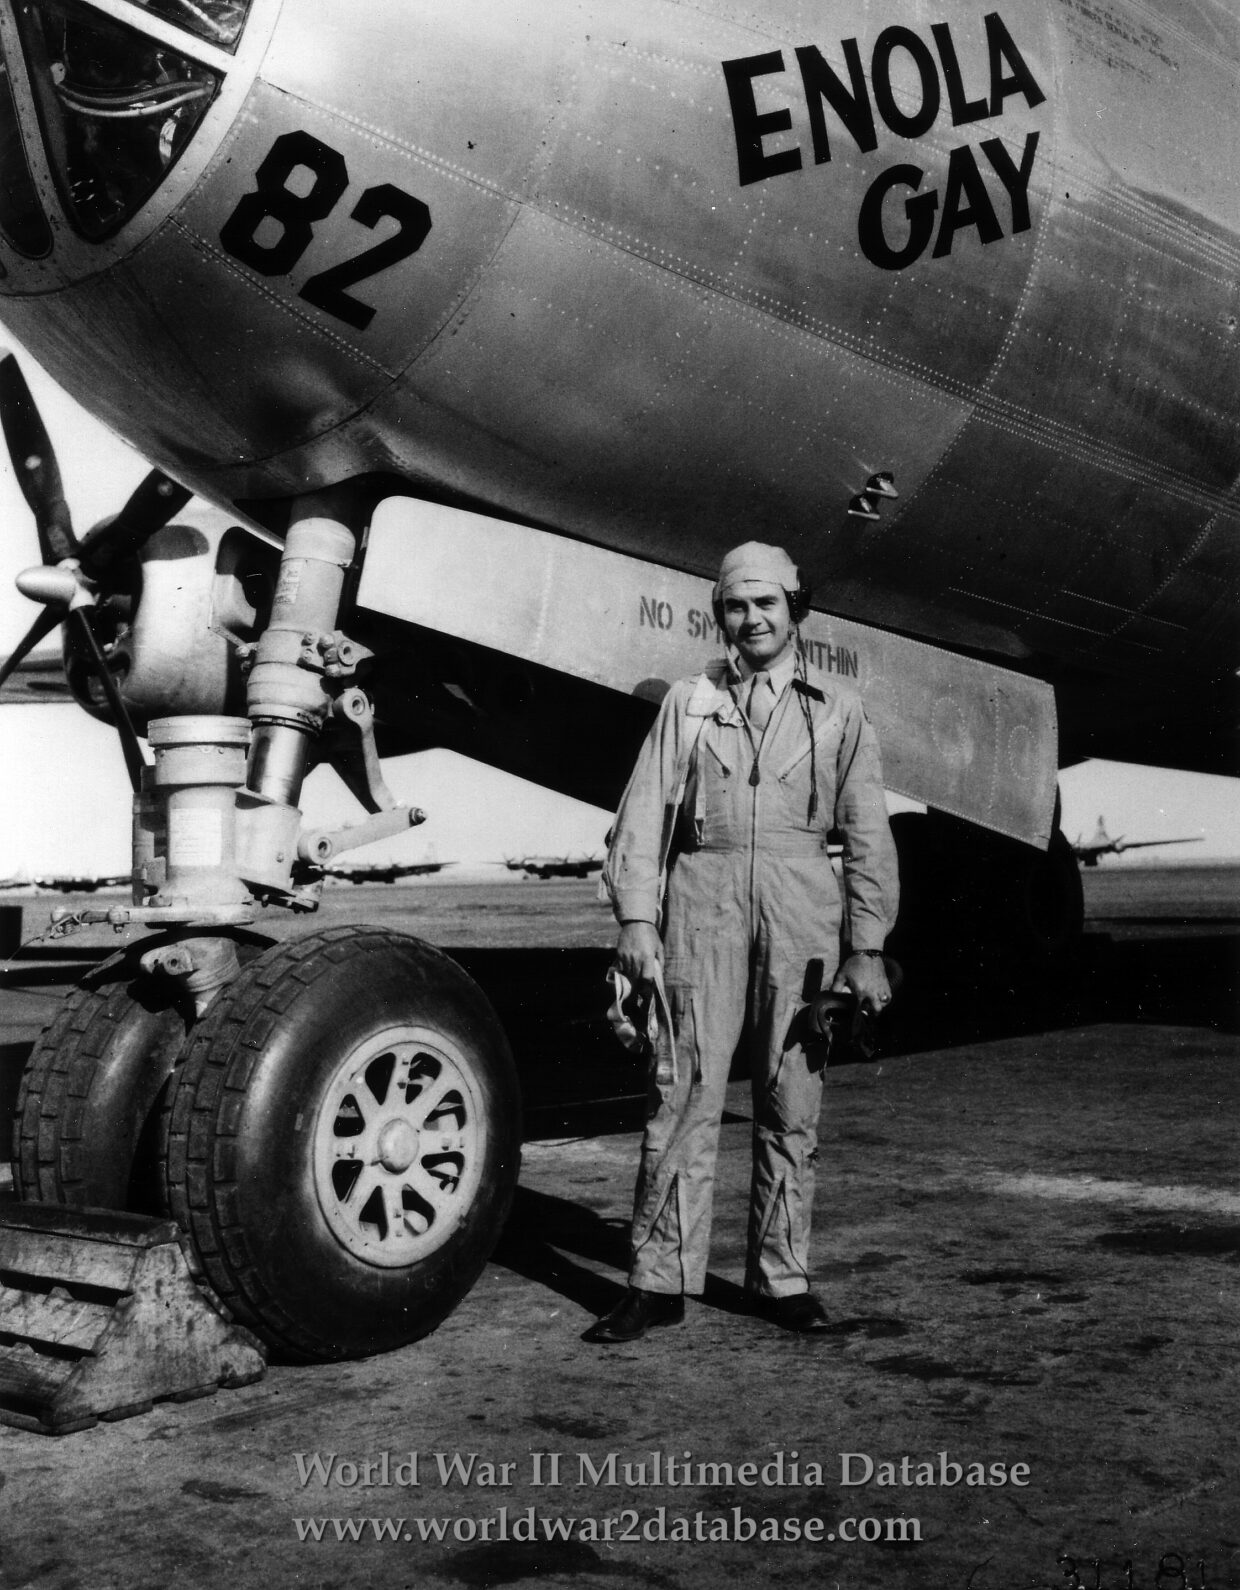 United States Army Air Force Colonel Paul Tibbets in front of the Enola Gay